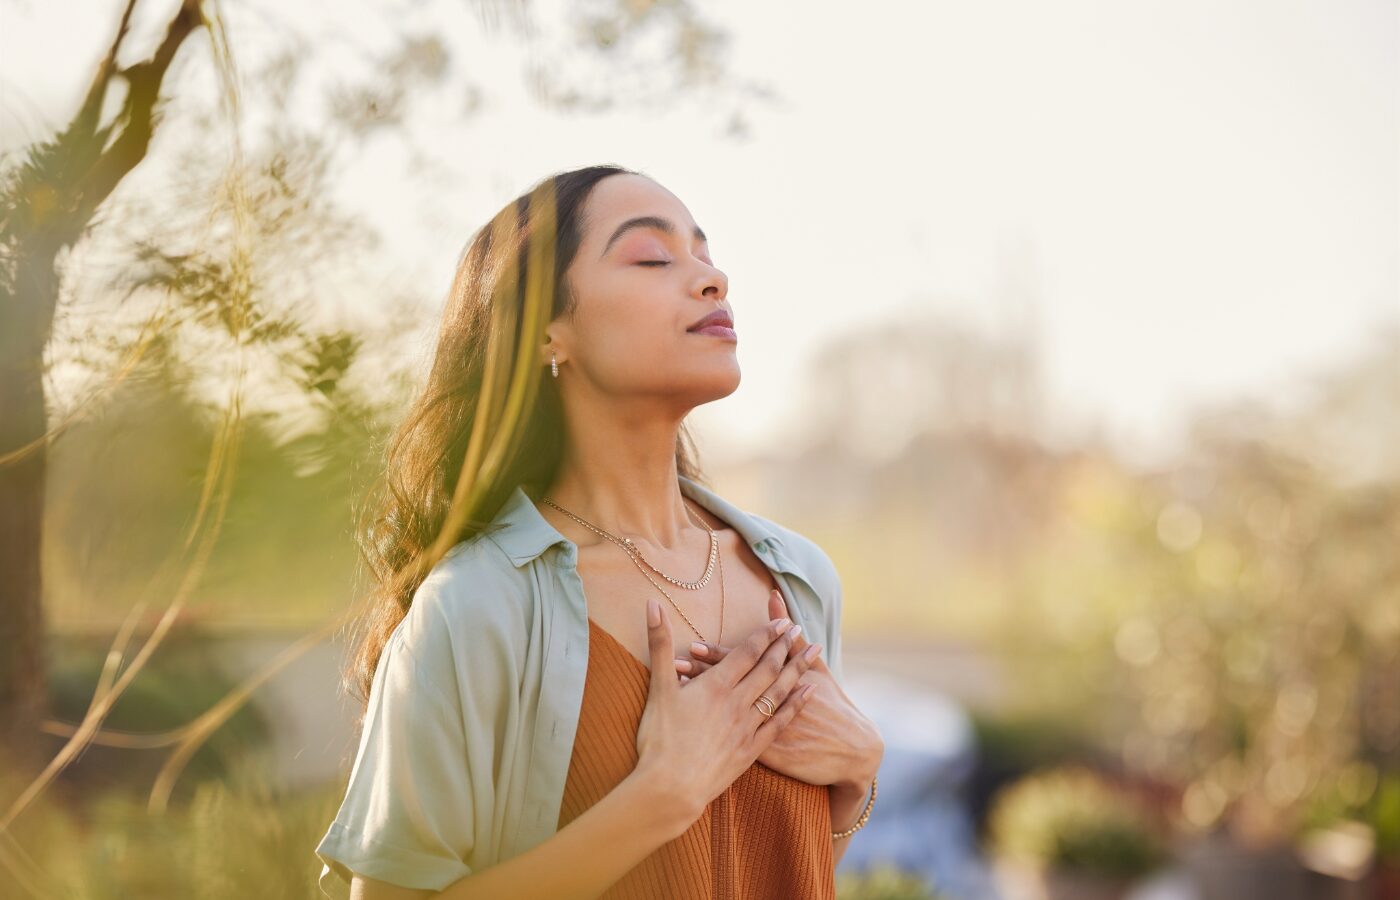 Photo of a black woman with her hand on her chest and breathing deeply against an outdoor abstracted background